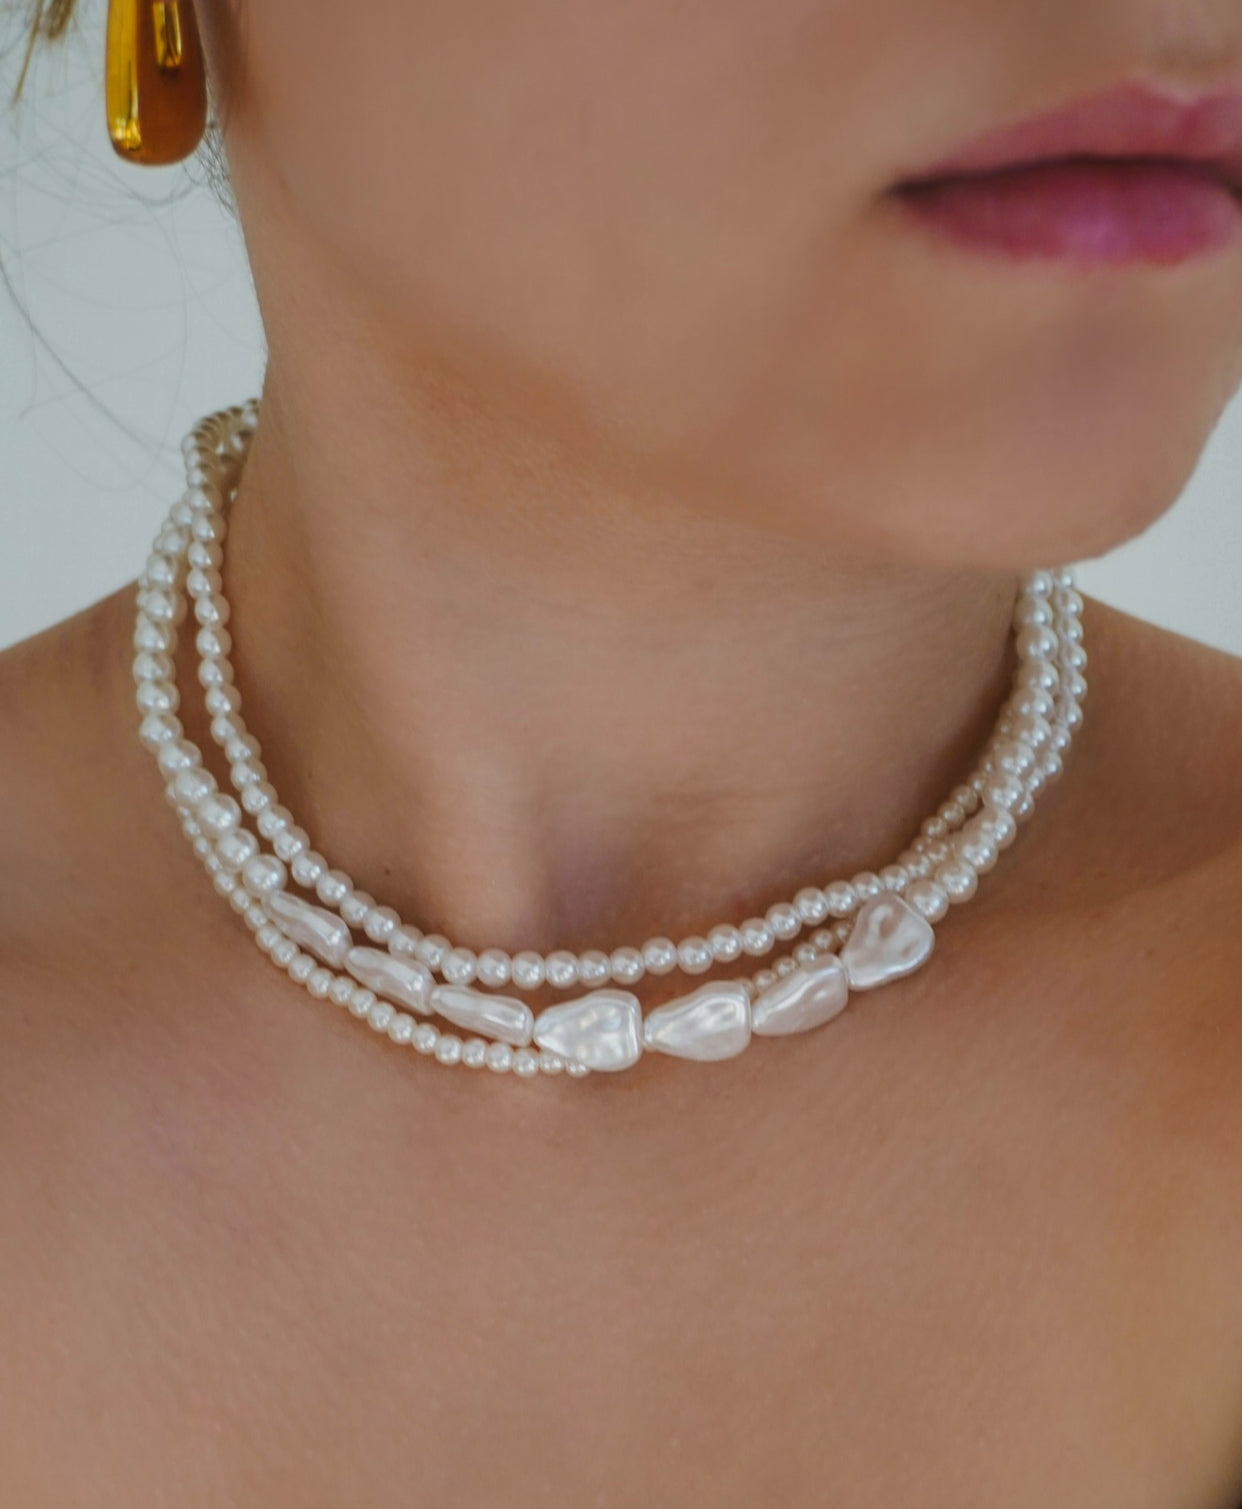 Triple pearly necklace